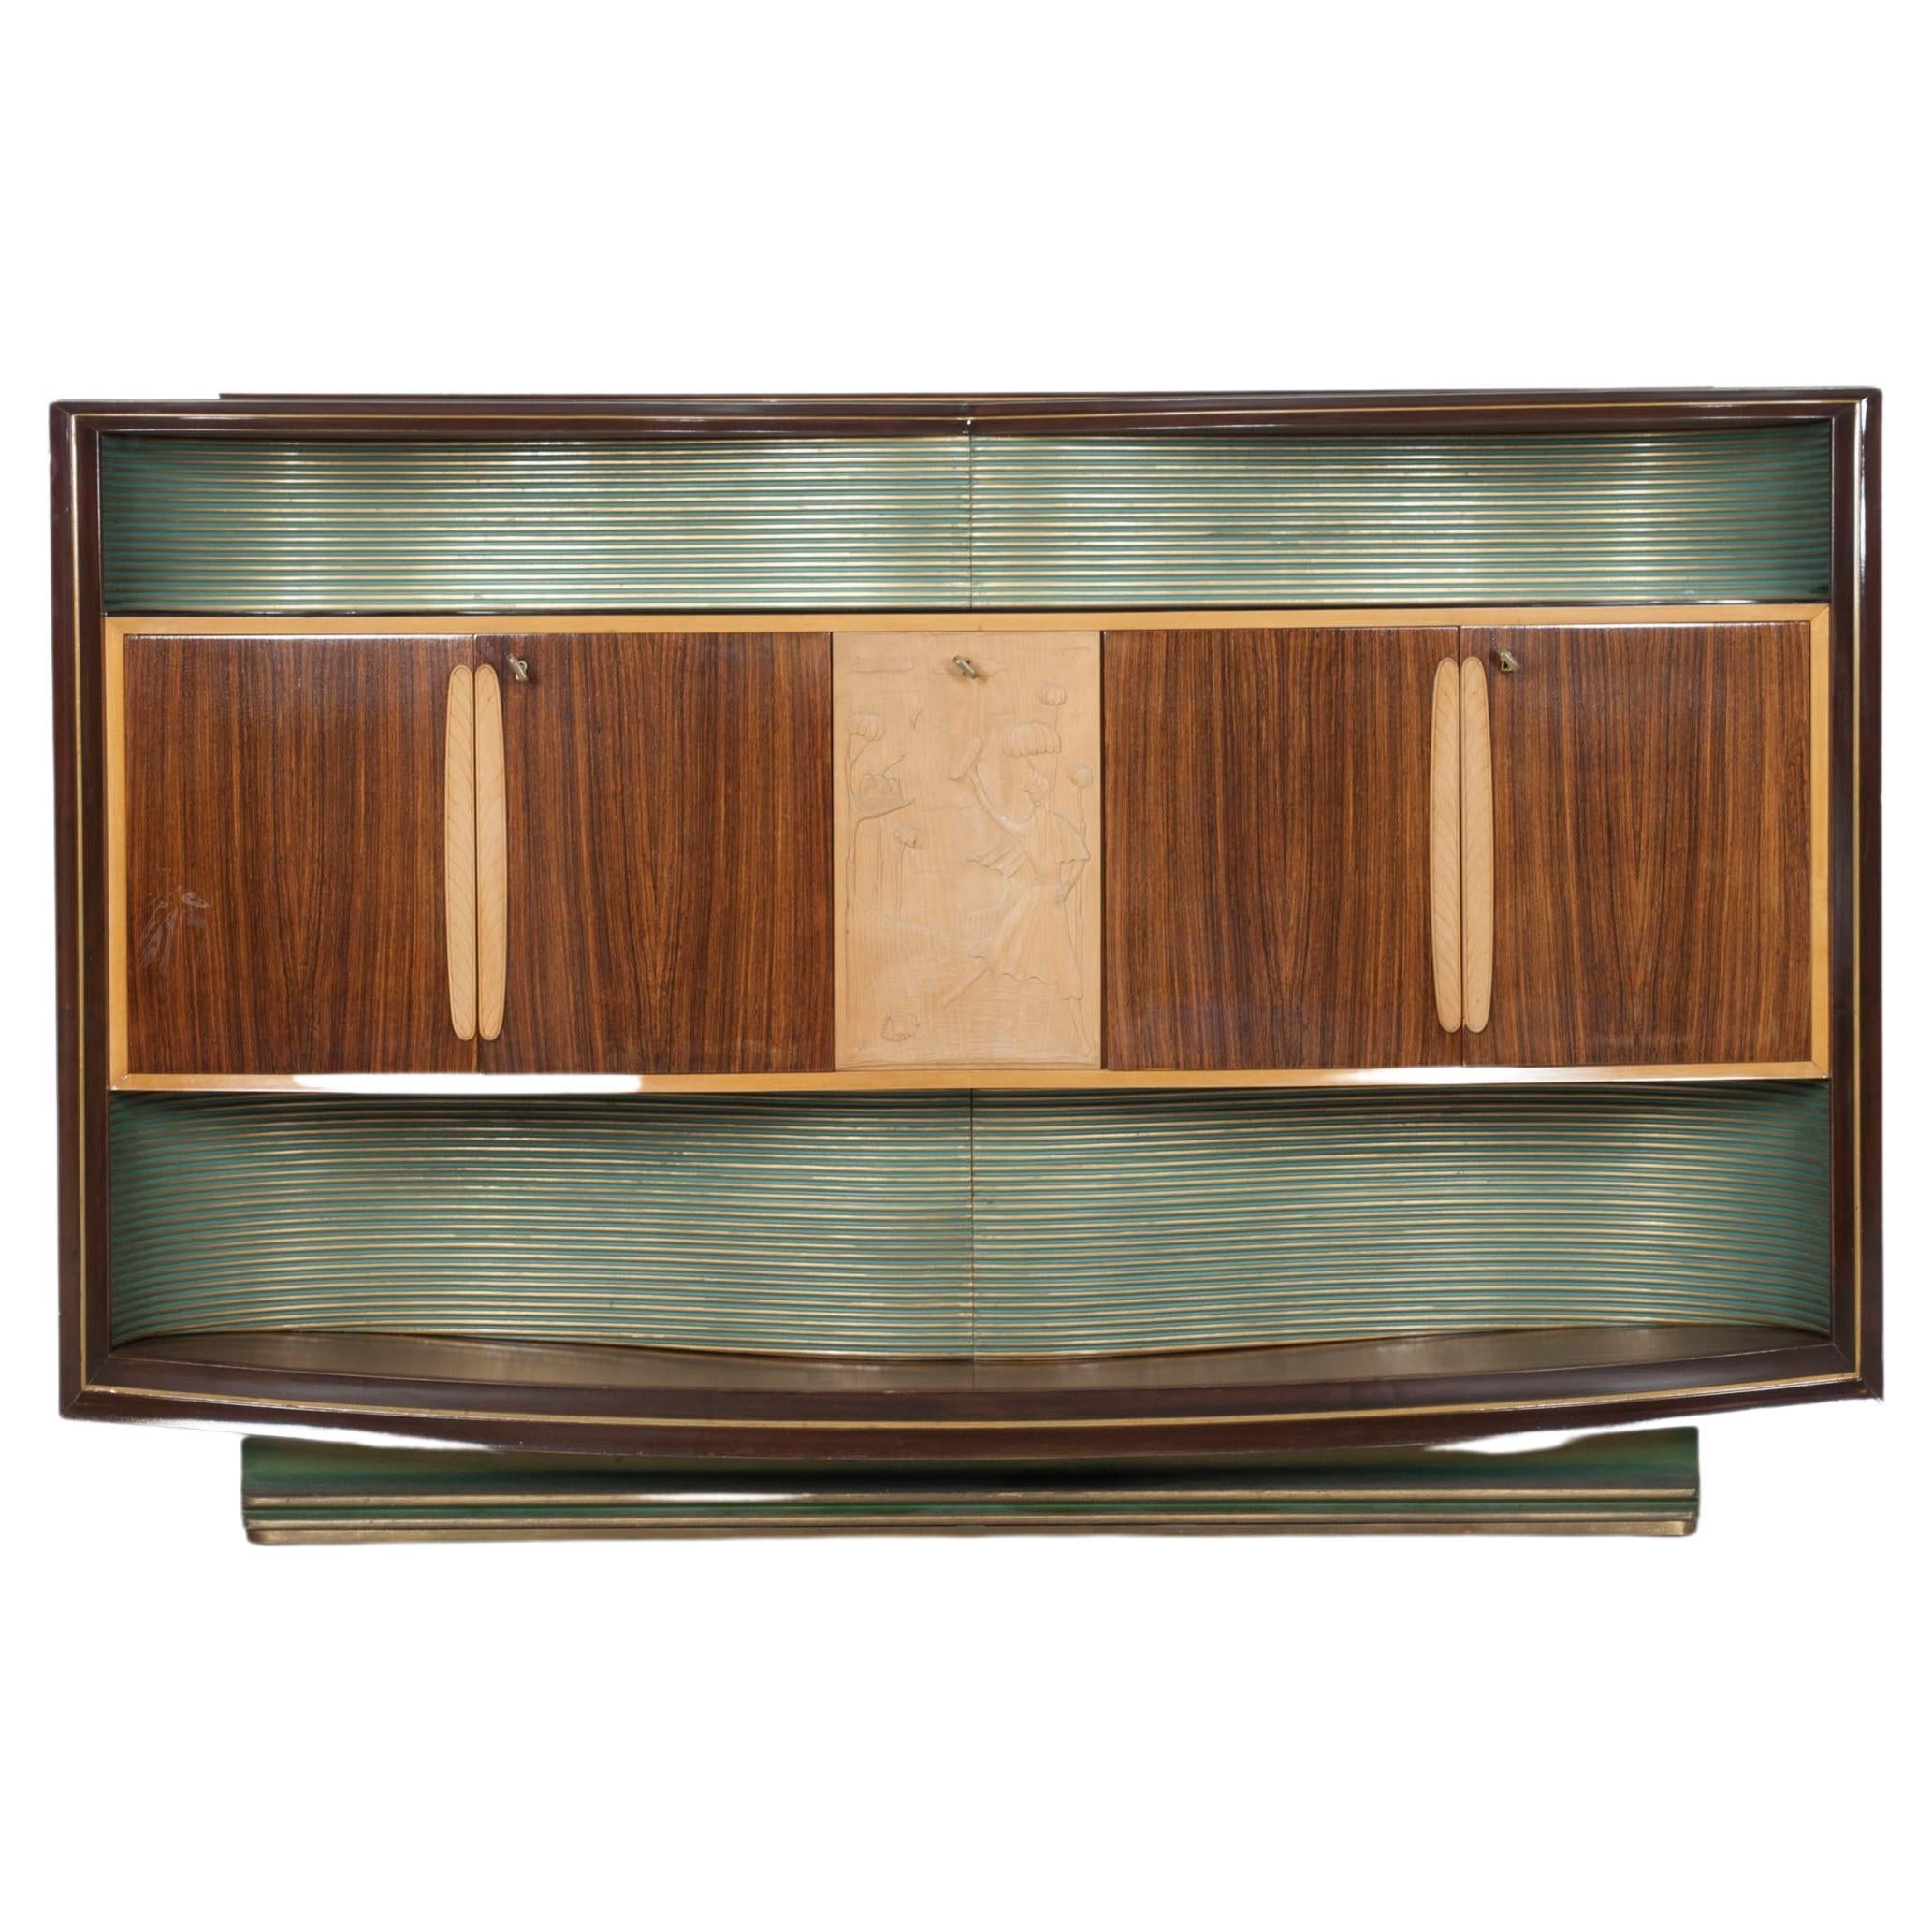 Lighted Vittorio Dassi "Midcentury" bar cabinet from the 1950s